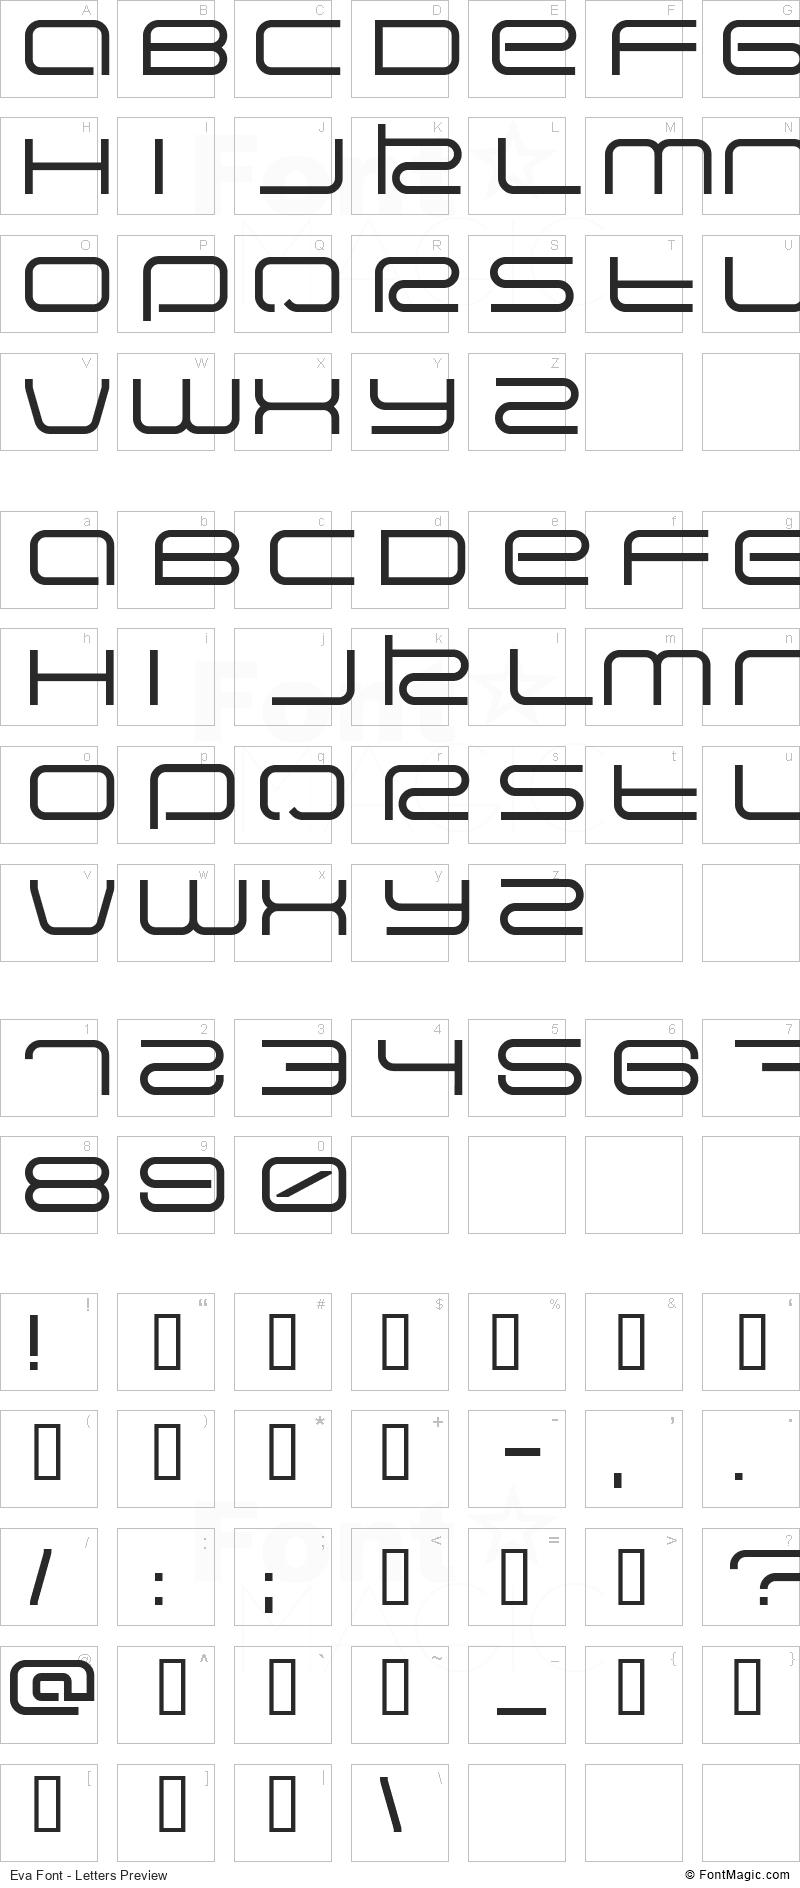 Eva Font - All Latters Preview Chart